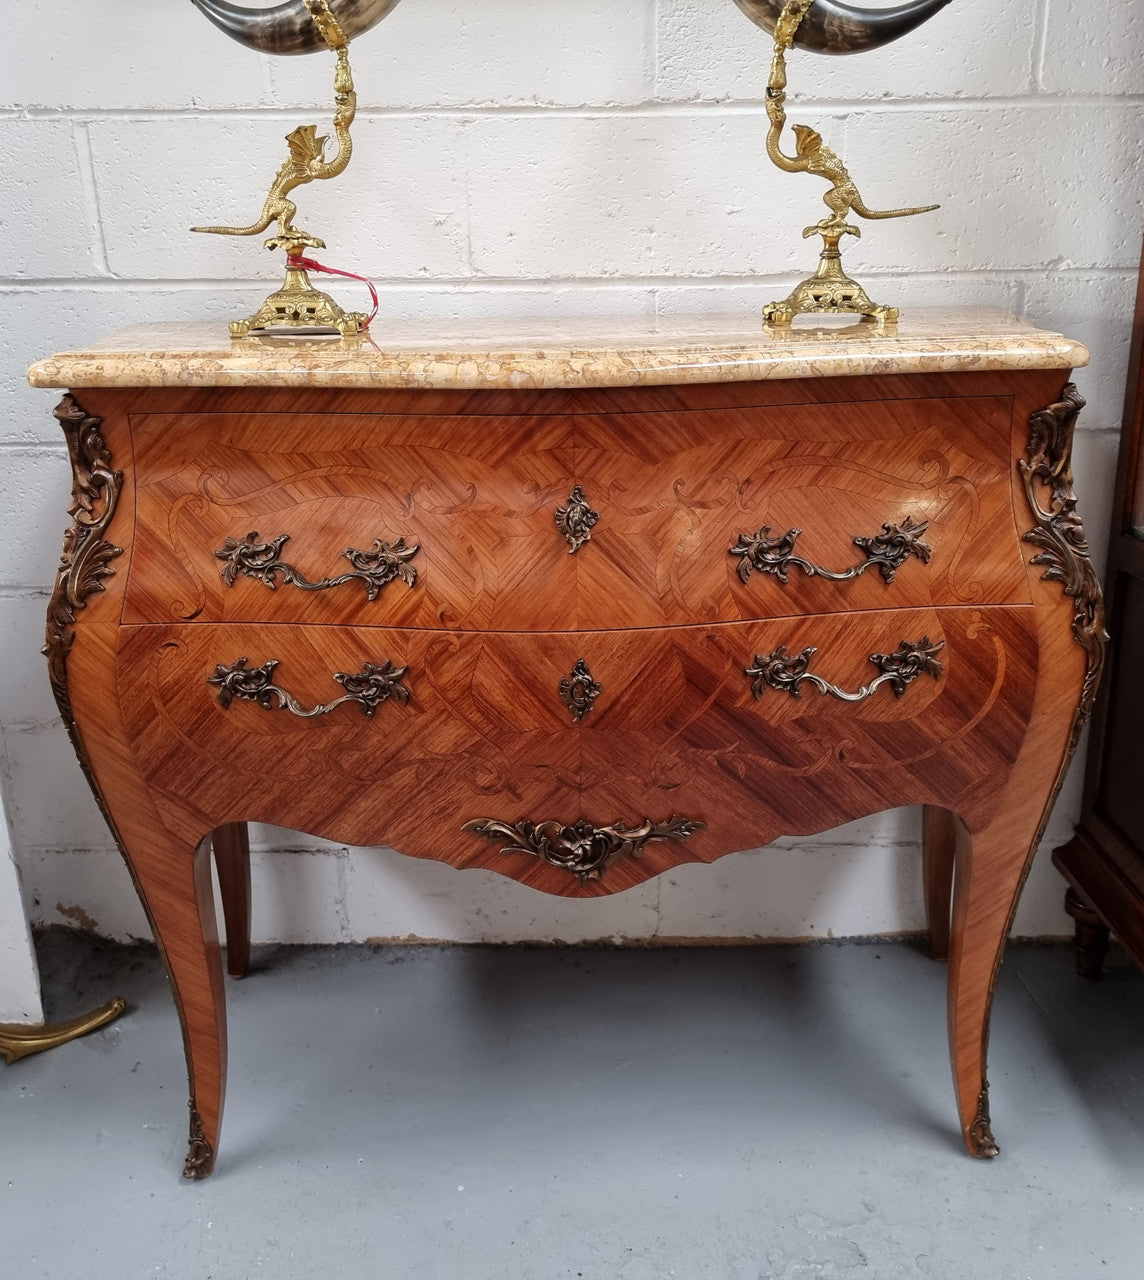 French marquetry inlaid Kingwood marble top commode. It has two drawers and beautiful mounts. Is in good original detailed condition.